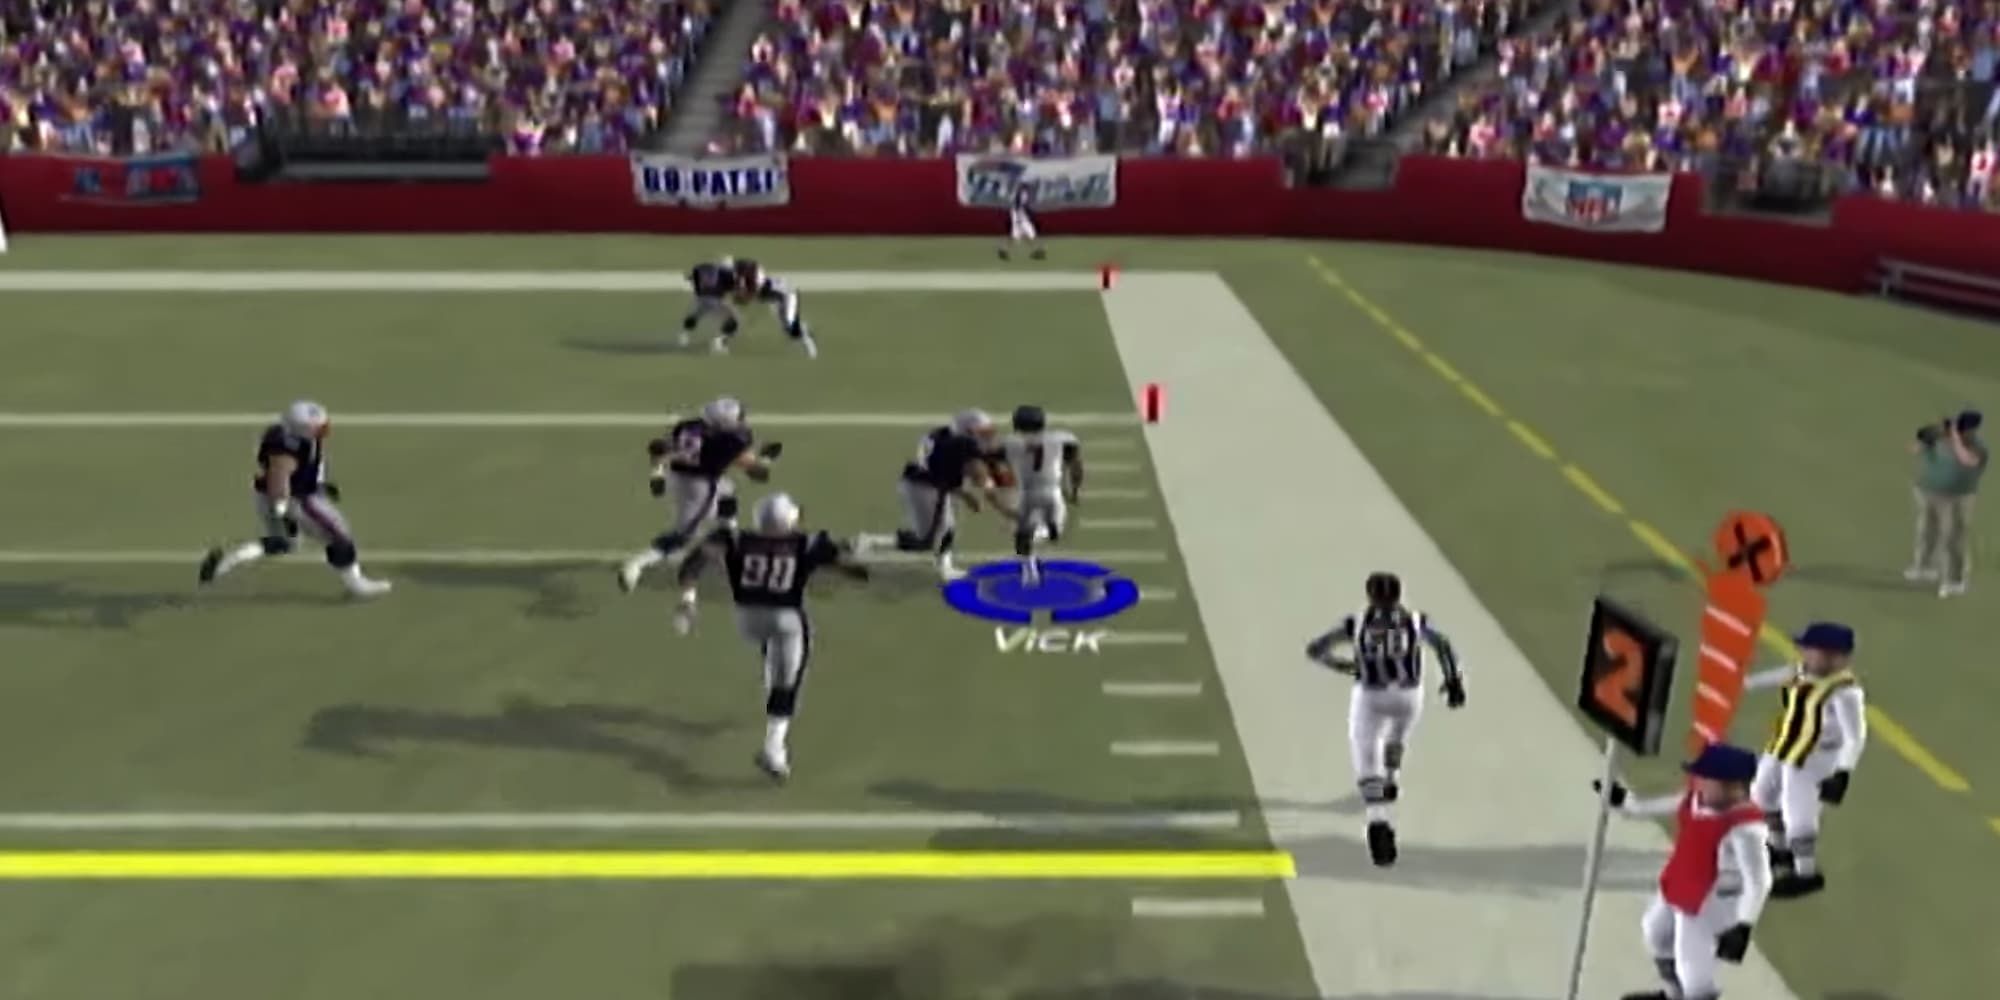 Michael Vick was tackled by a New England Patriots player at Madden 2004.